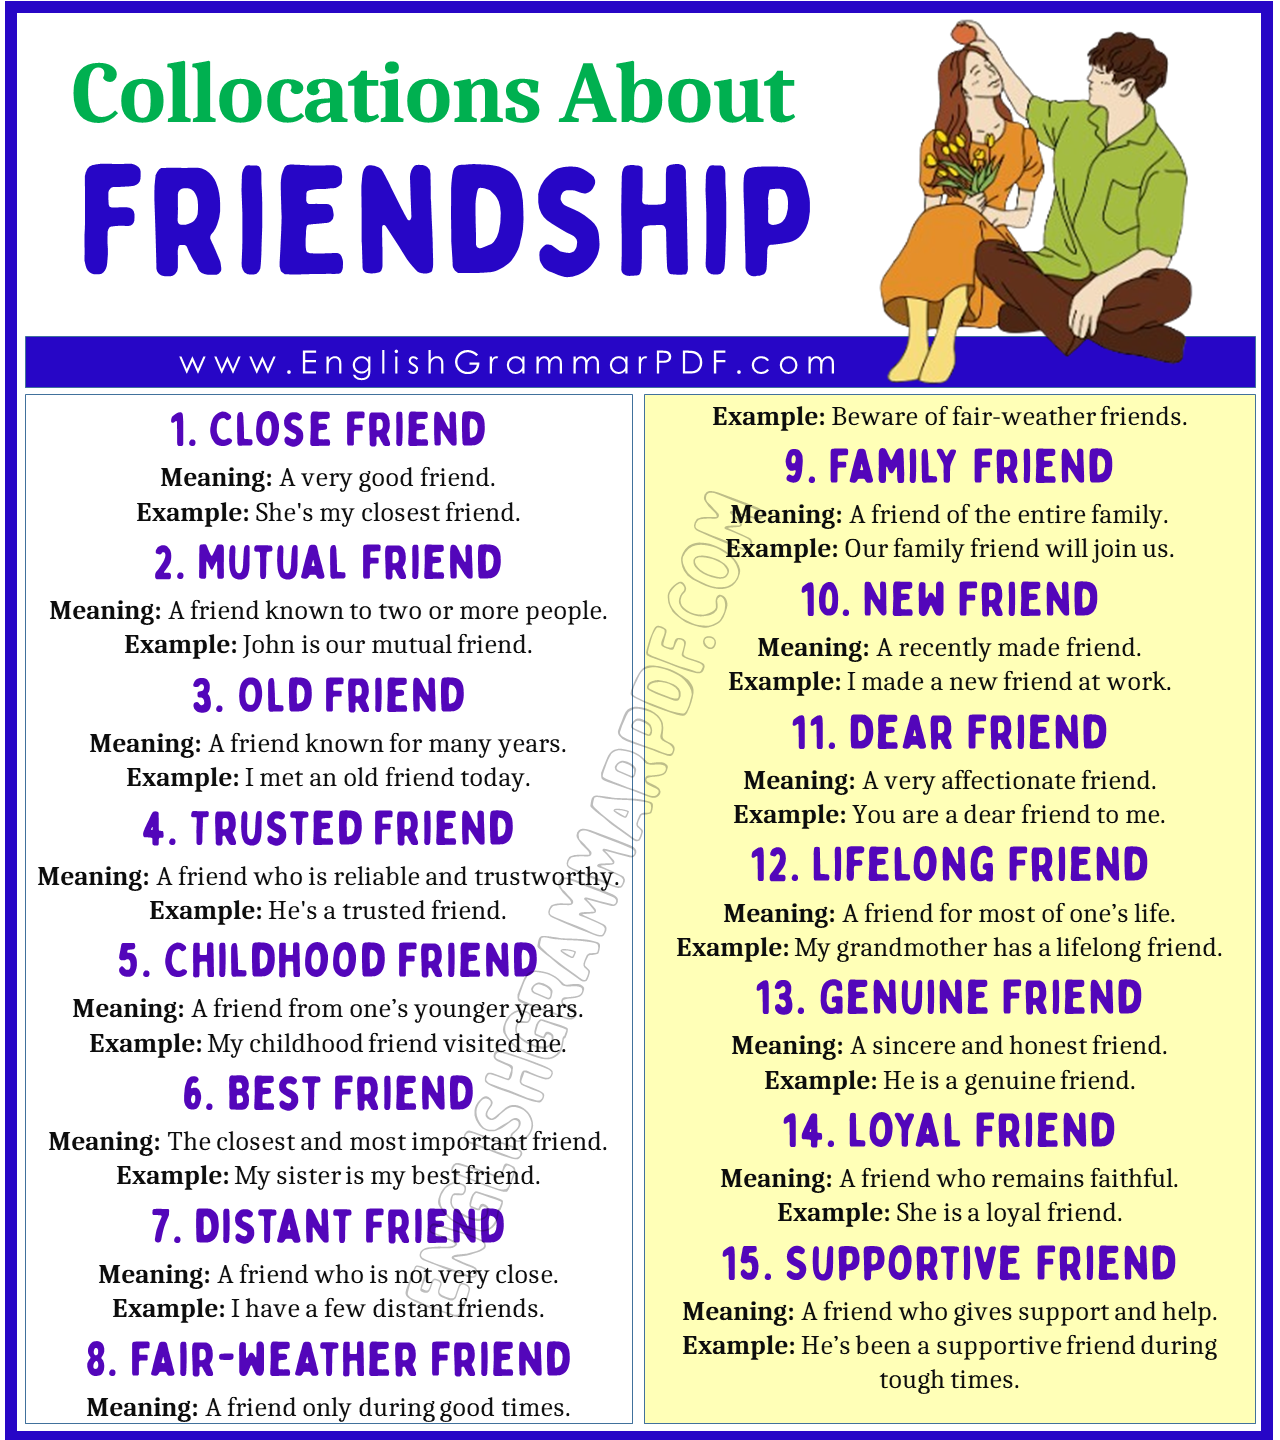 Collocations About Friendship